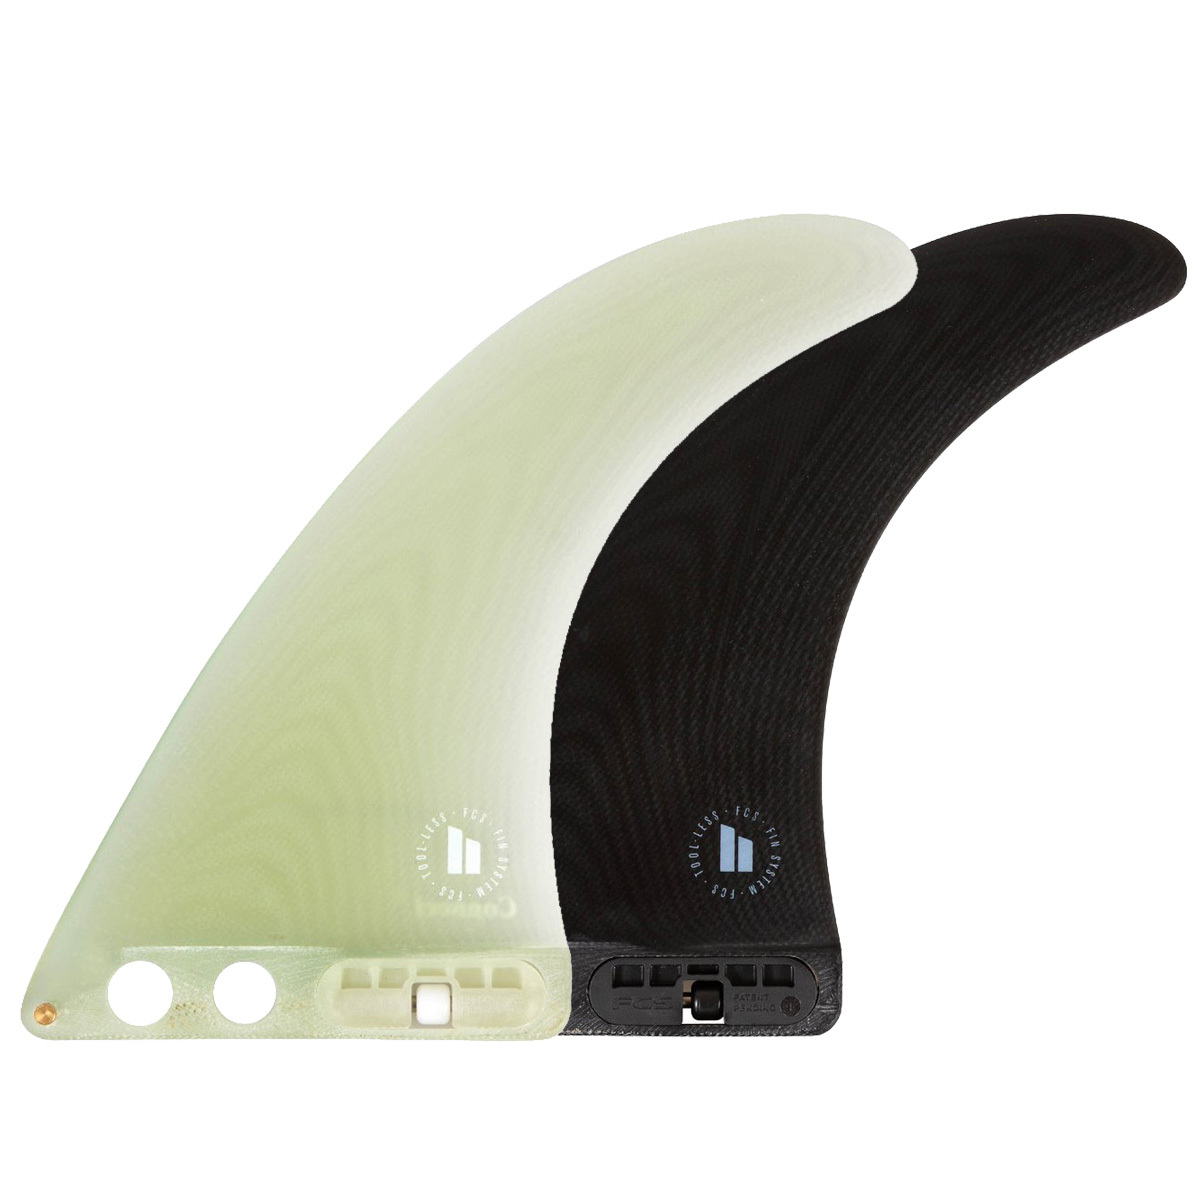 FCS2 エフシーエスツー ロングボード センターフィン 8.0" CONNECT PG LONGBOARD FIN コネクト シングルフィン Black / Clear 2カラー